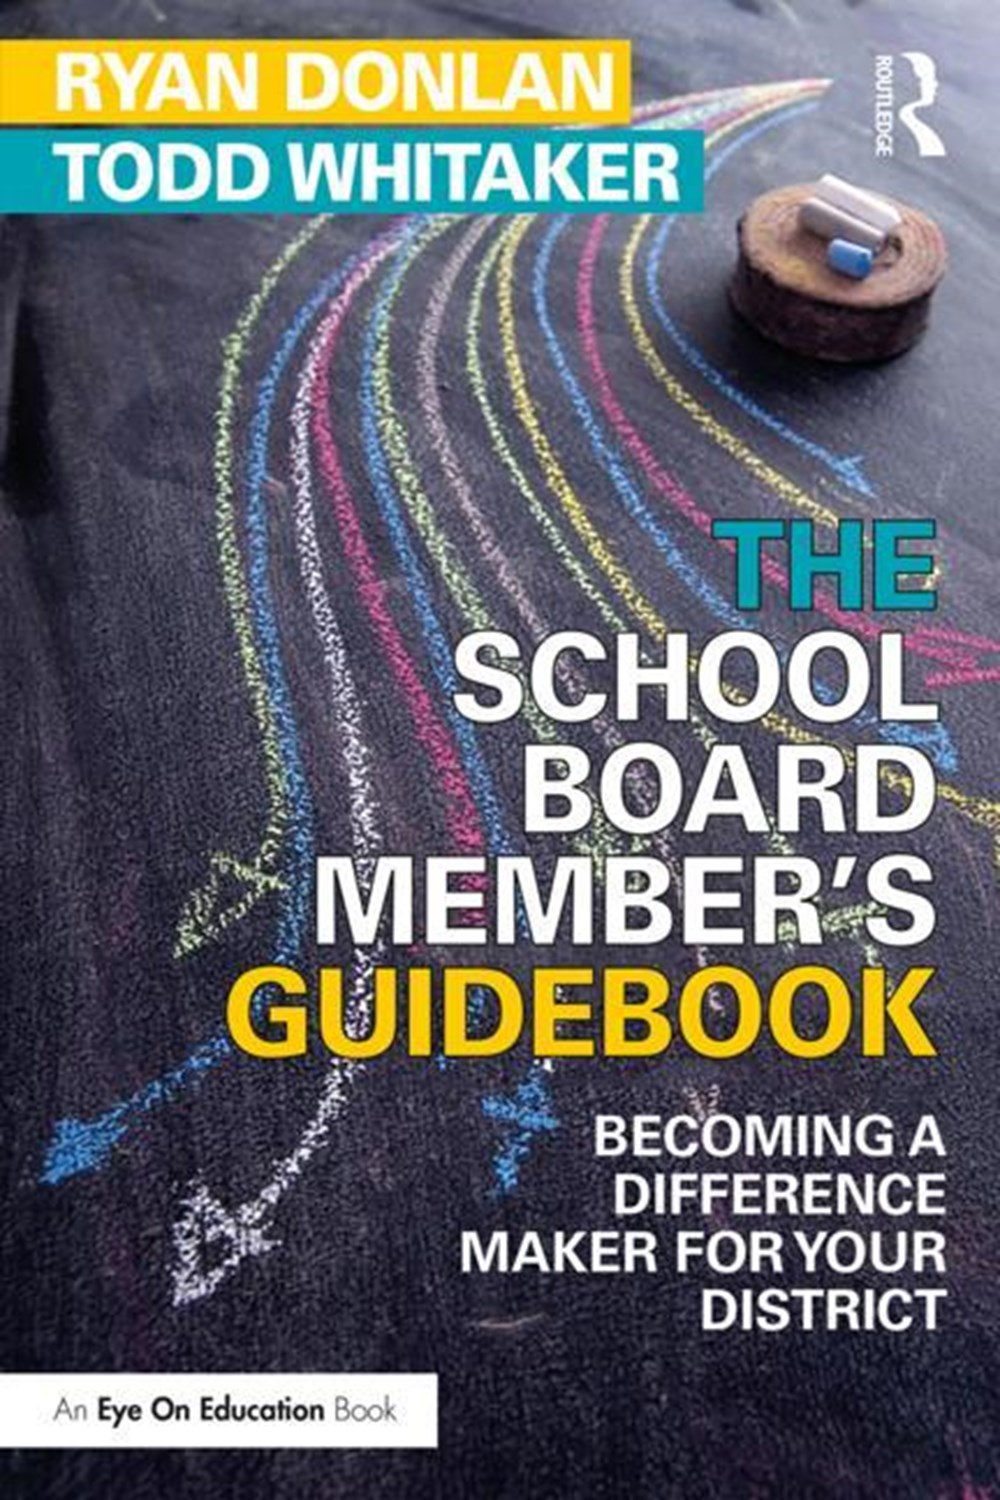 School Board Member's Guidebook: Becoming a Difference Maker for Your District